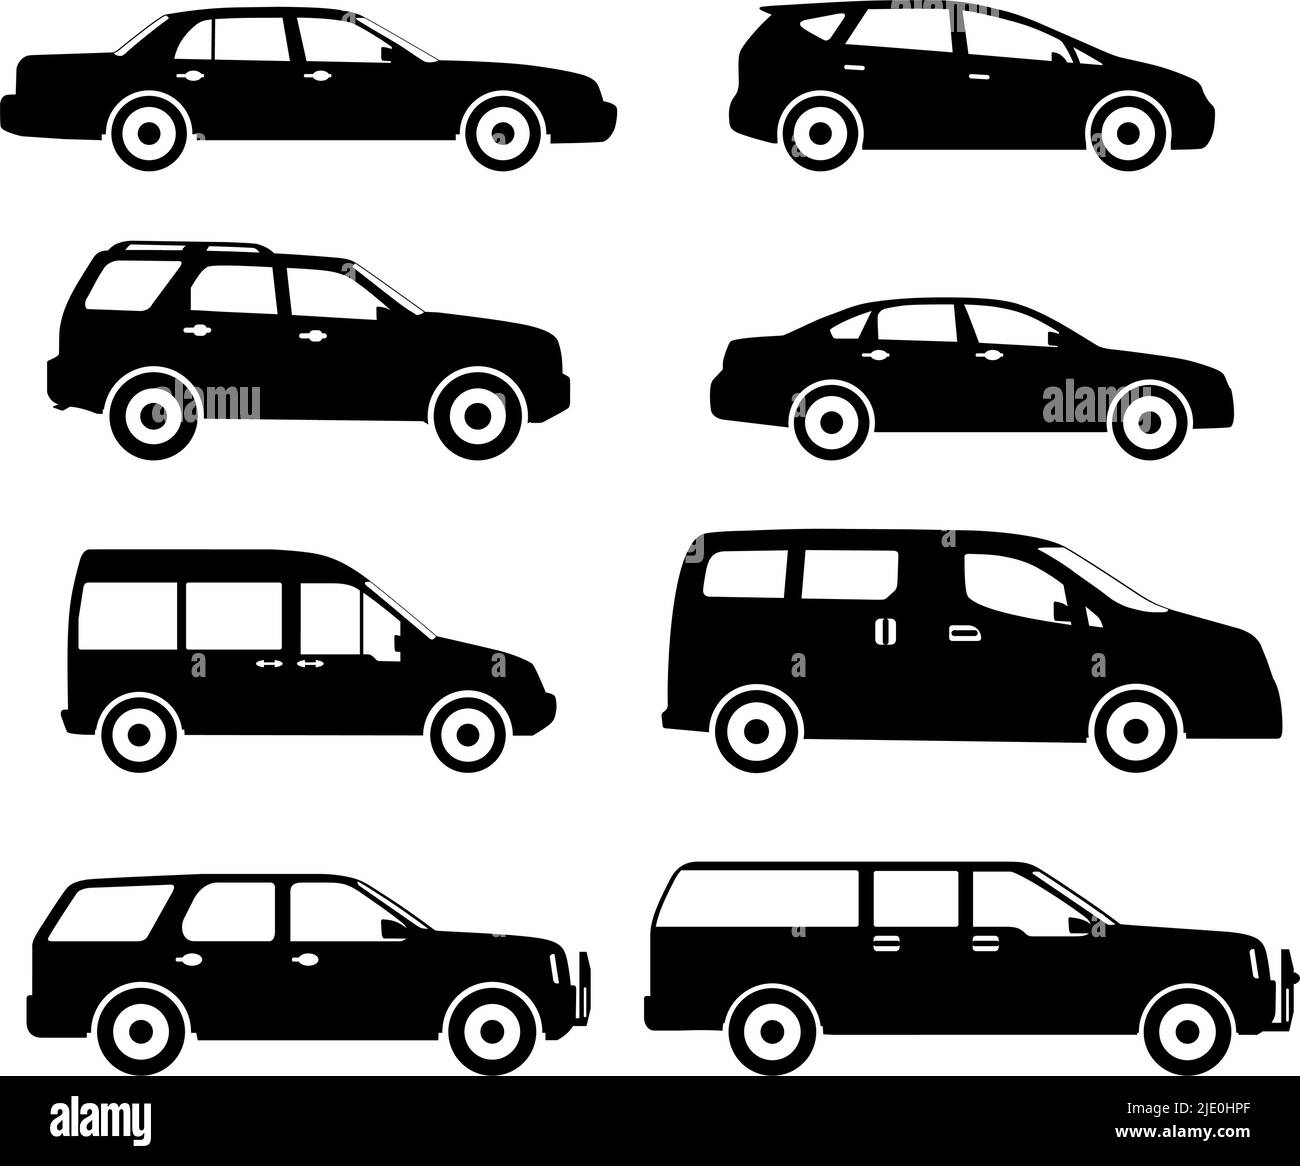 Silhouette illustration of six cars on a white background. Stock Vector